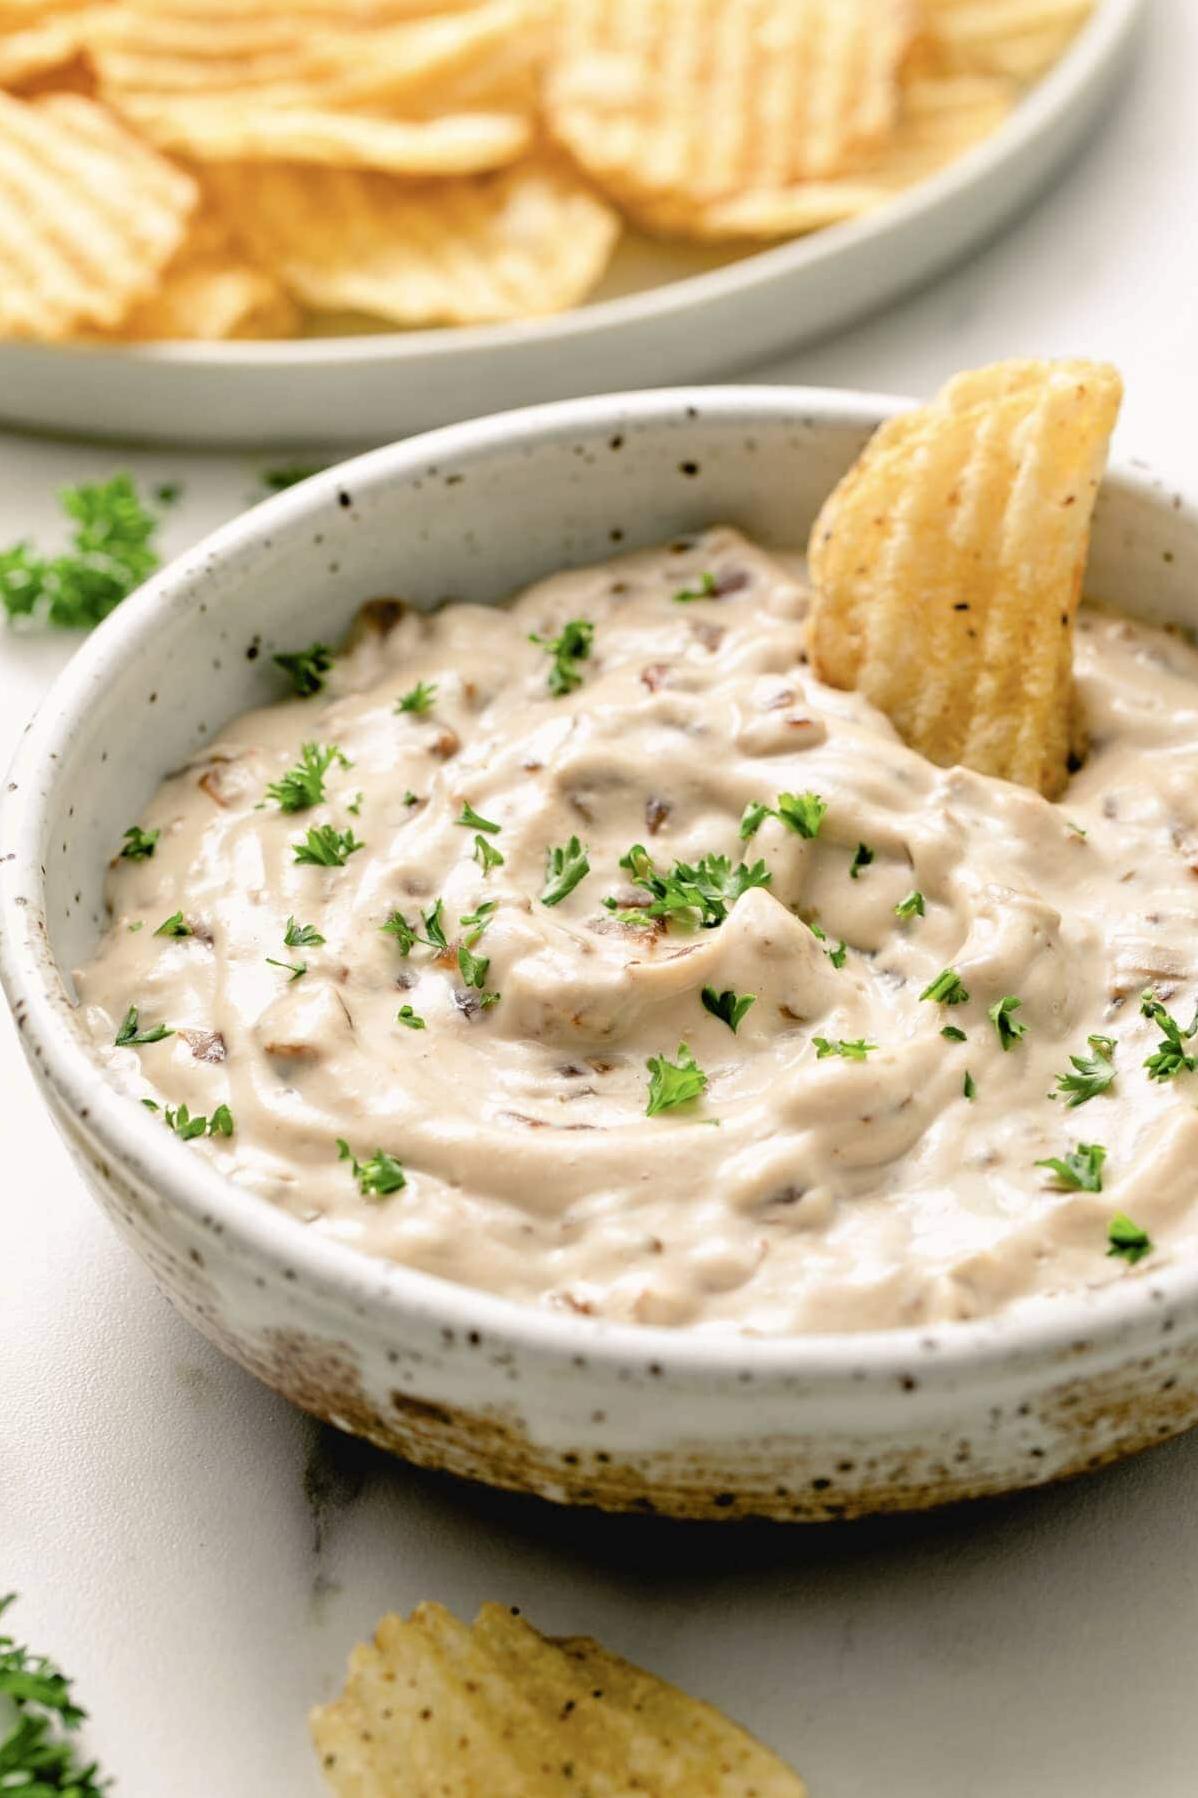 Sure, here are 11 creative captions for the Vegan French Onion Dip recipe: